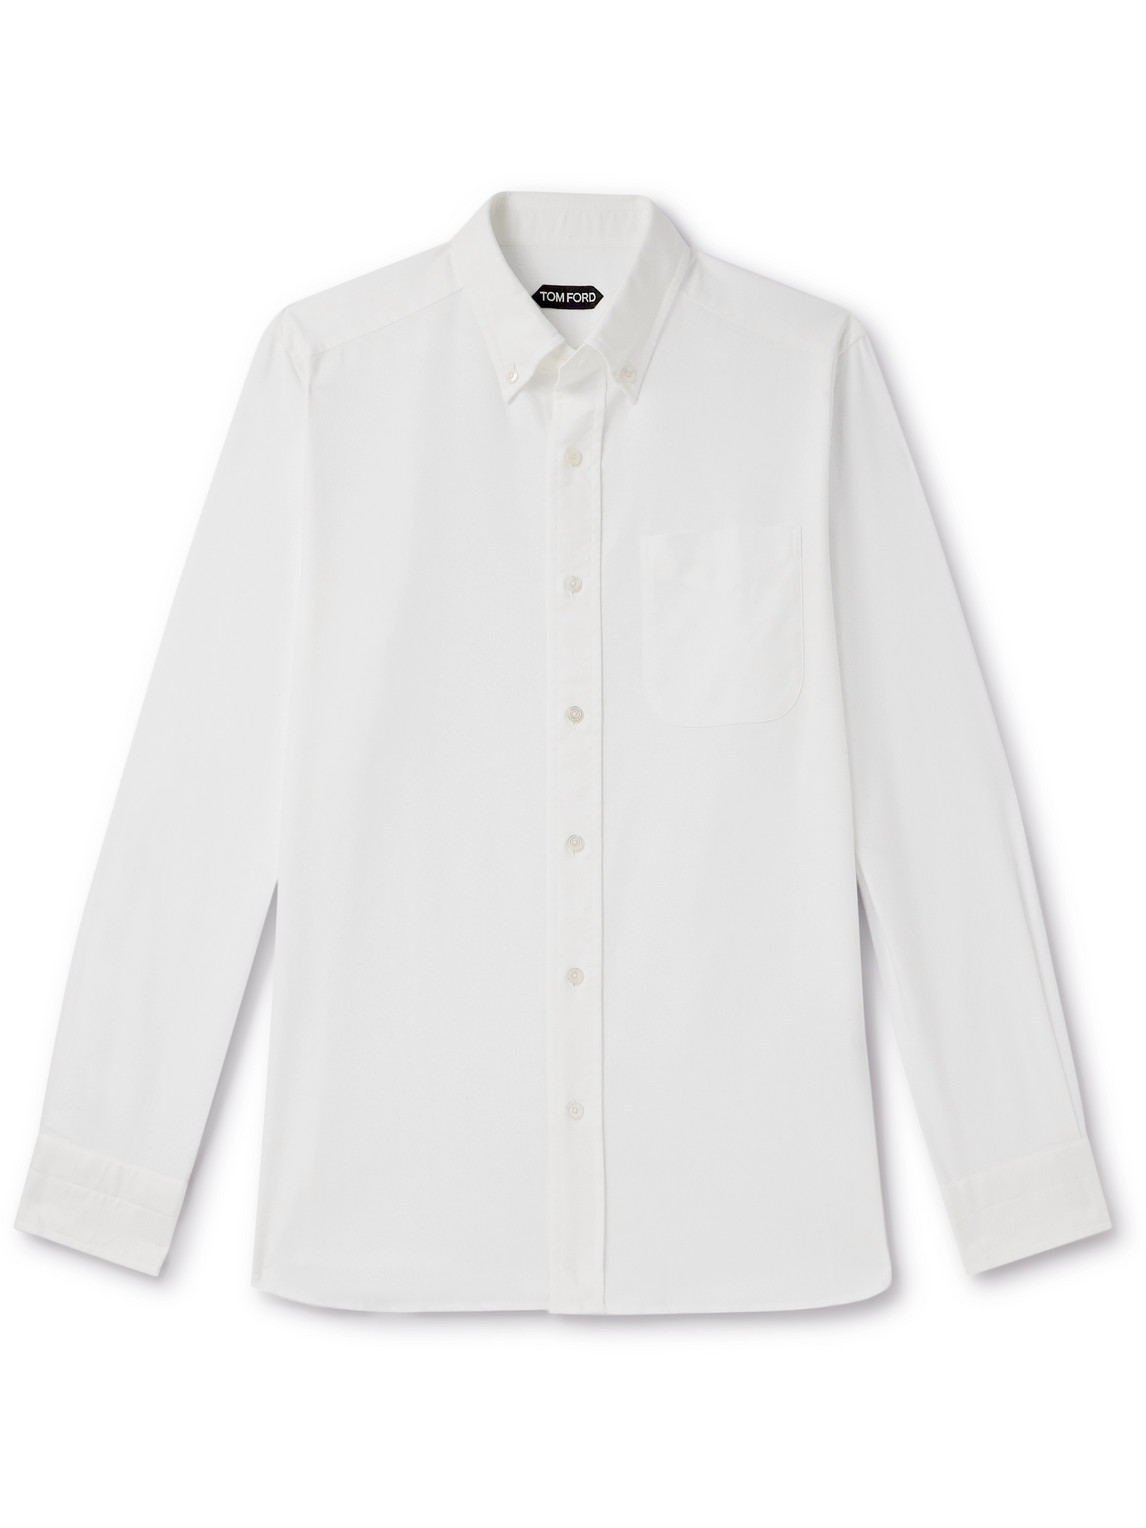 Tom Ford Button-down Collar Cotton Oxford Shirt In White